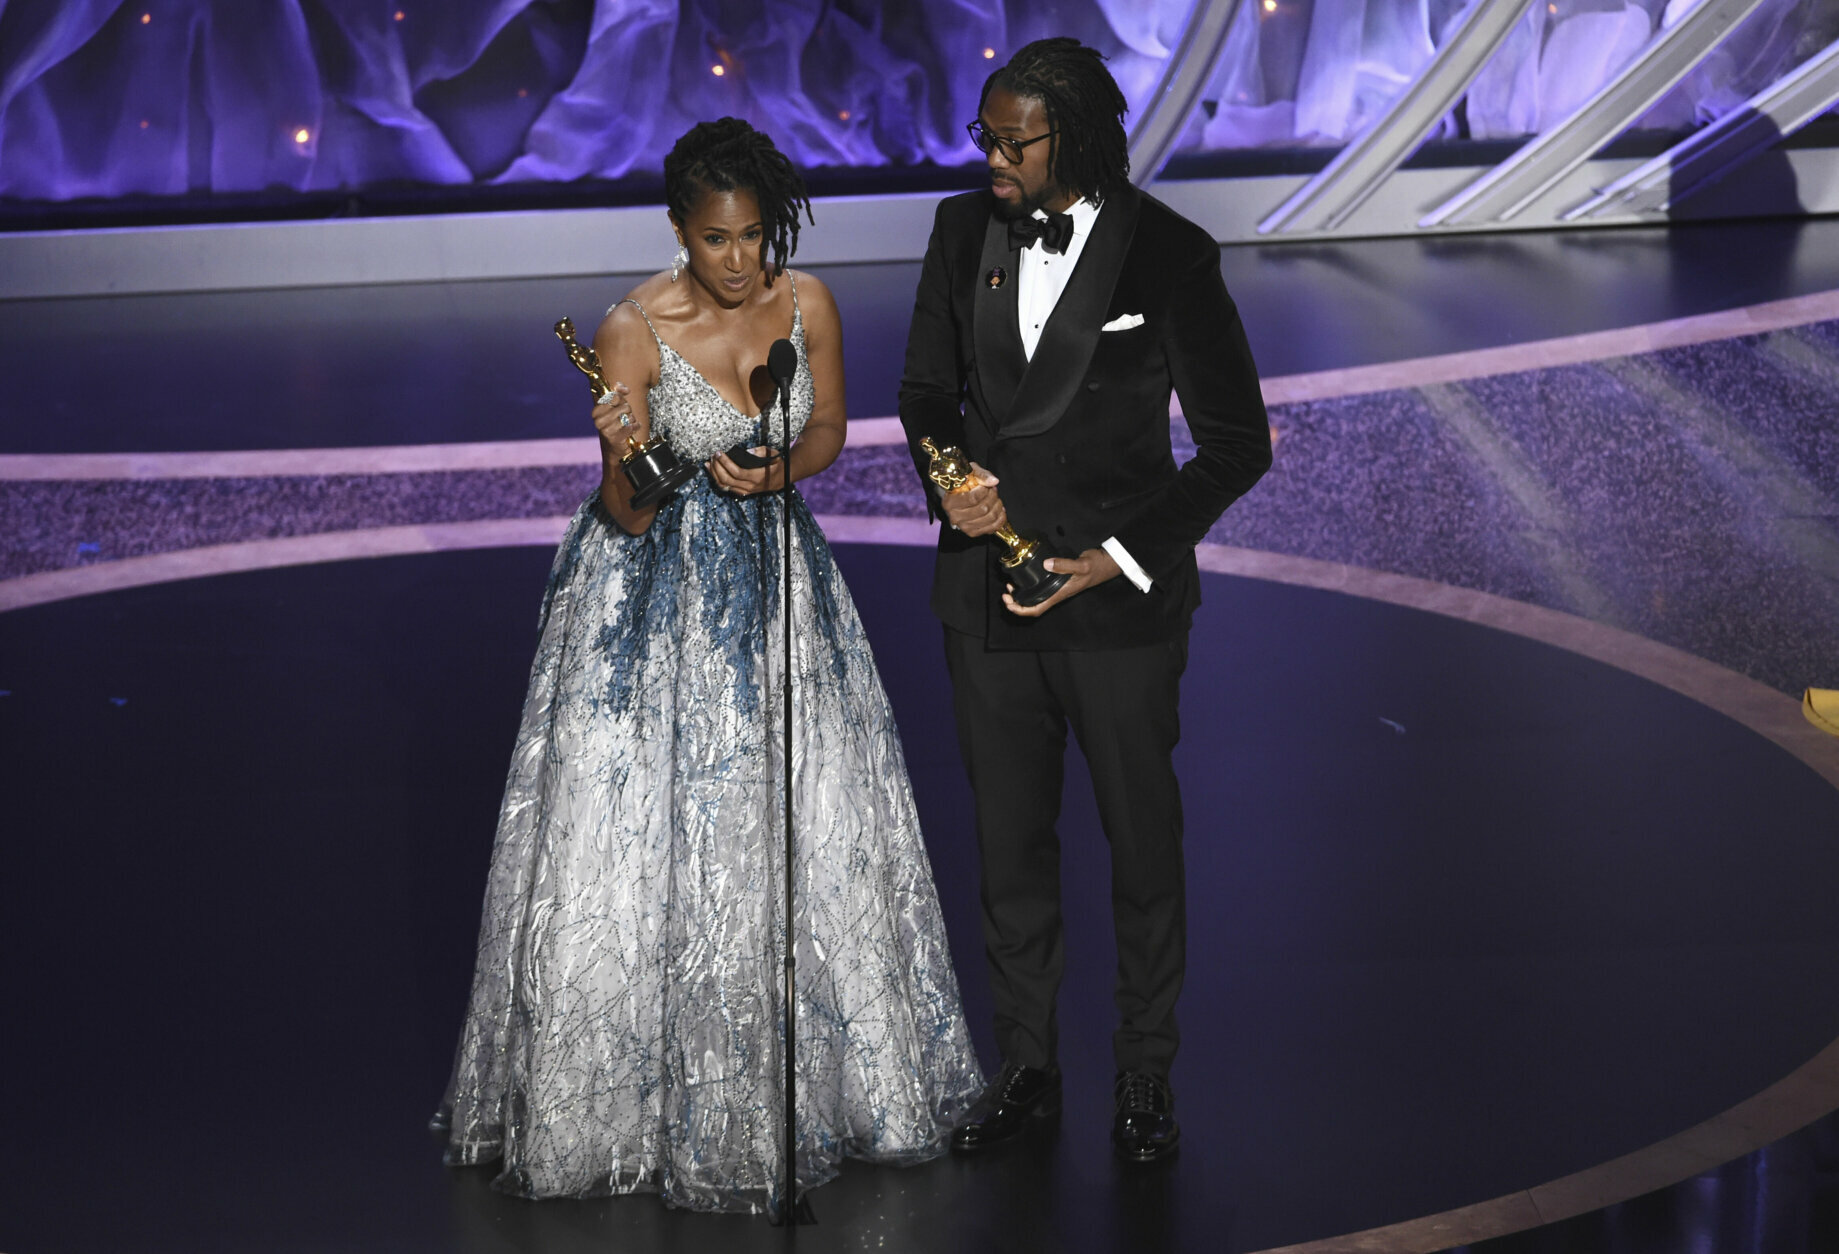 Karen Rupert Toliver, left, and Matthew A. Cherry accept the award for best animated short film for "Hair Love" at the Oscars on Sunday, Feb. 9, 2020, at the Dolby Theatre in Los Angeles. (AP Photo/Chris Pizzello)